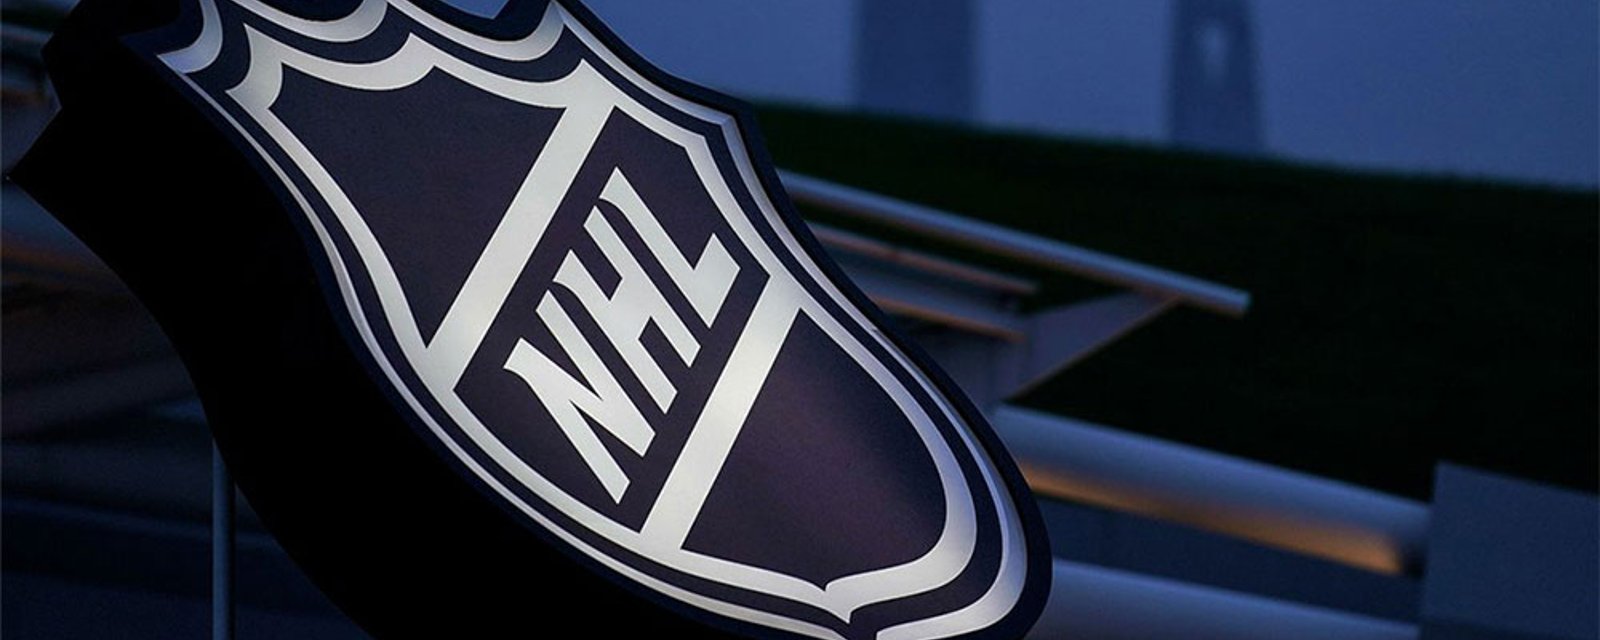 Written Code of Conduct coming to the NHL following allegations of abuse from coaching ranks